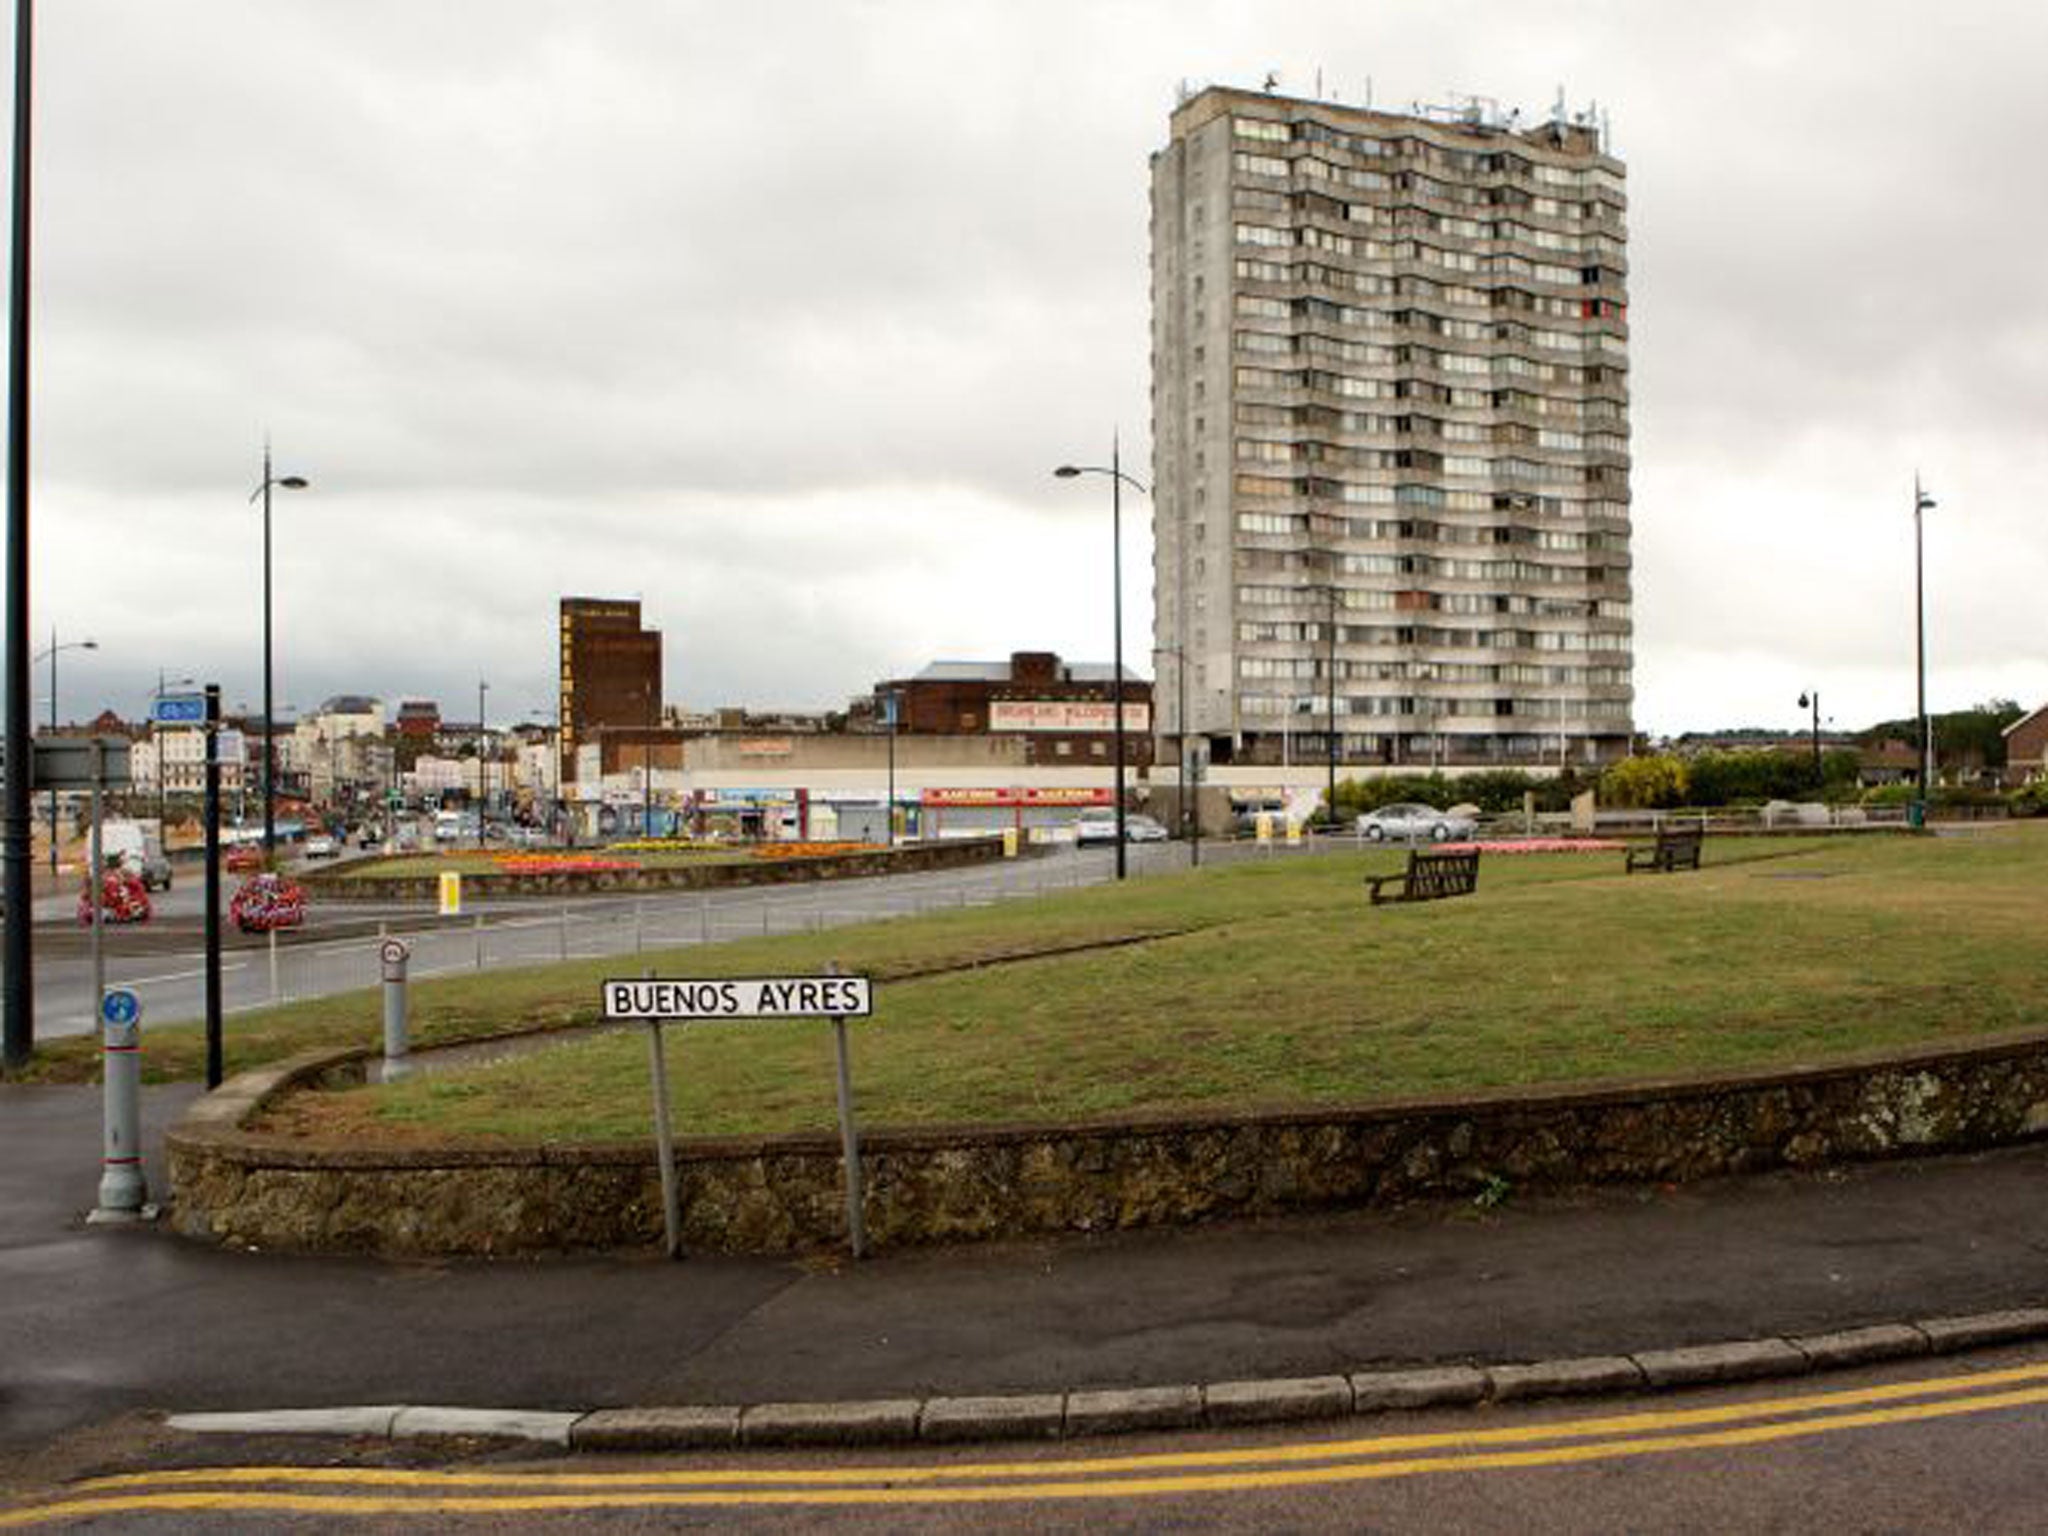 Margate is one of Britain’s most deprived seaside towns  